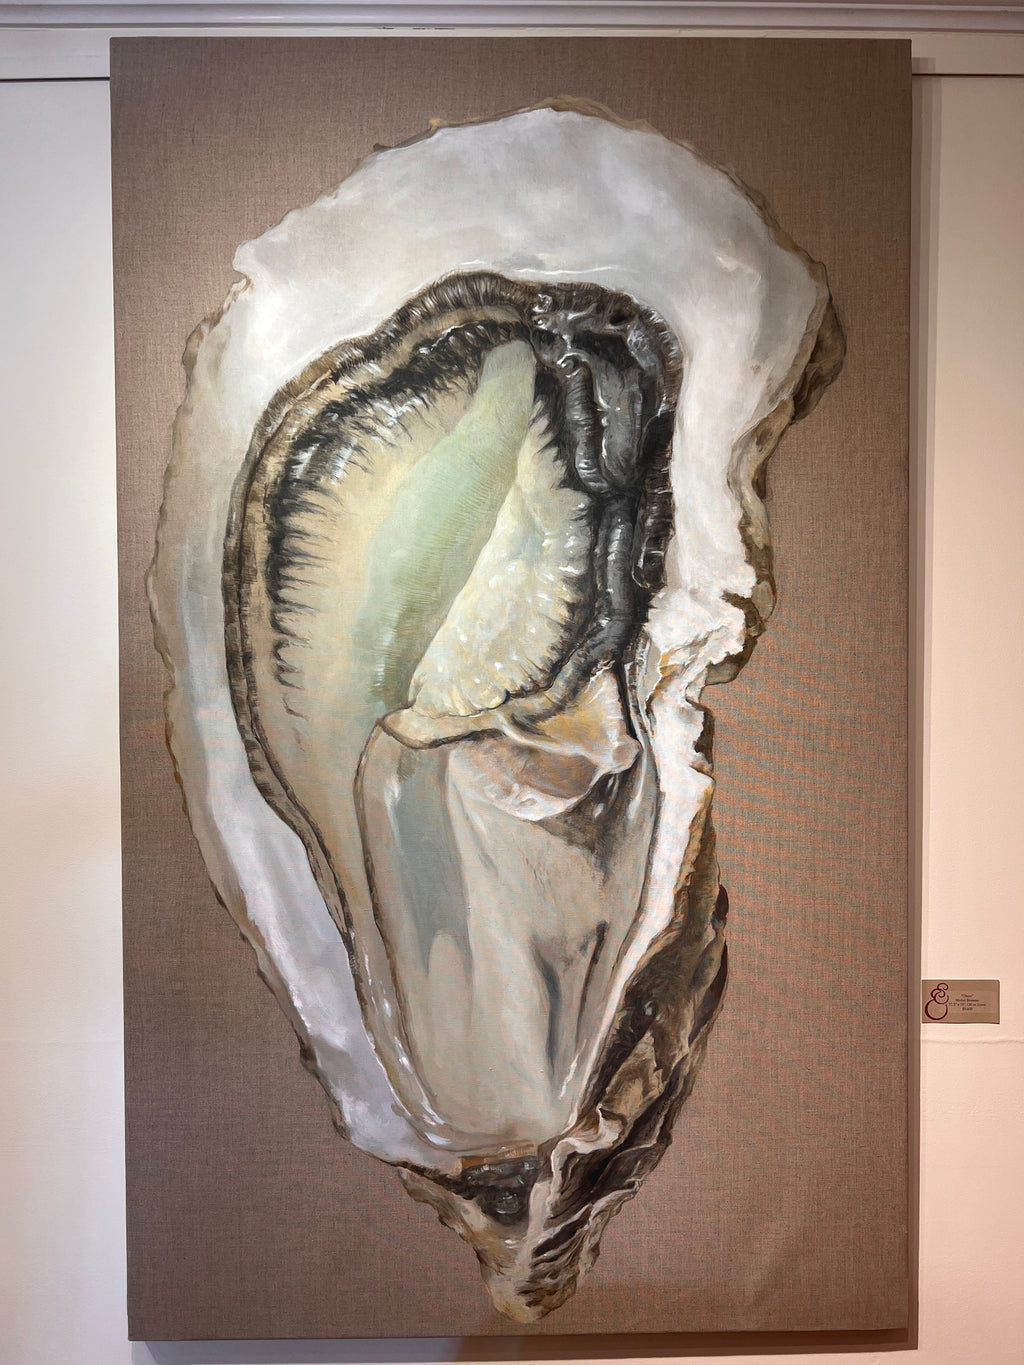 Photorealistic painting of an oyster.